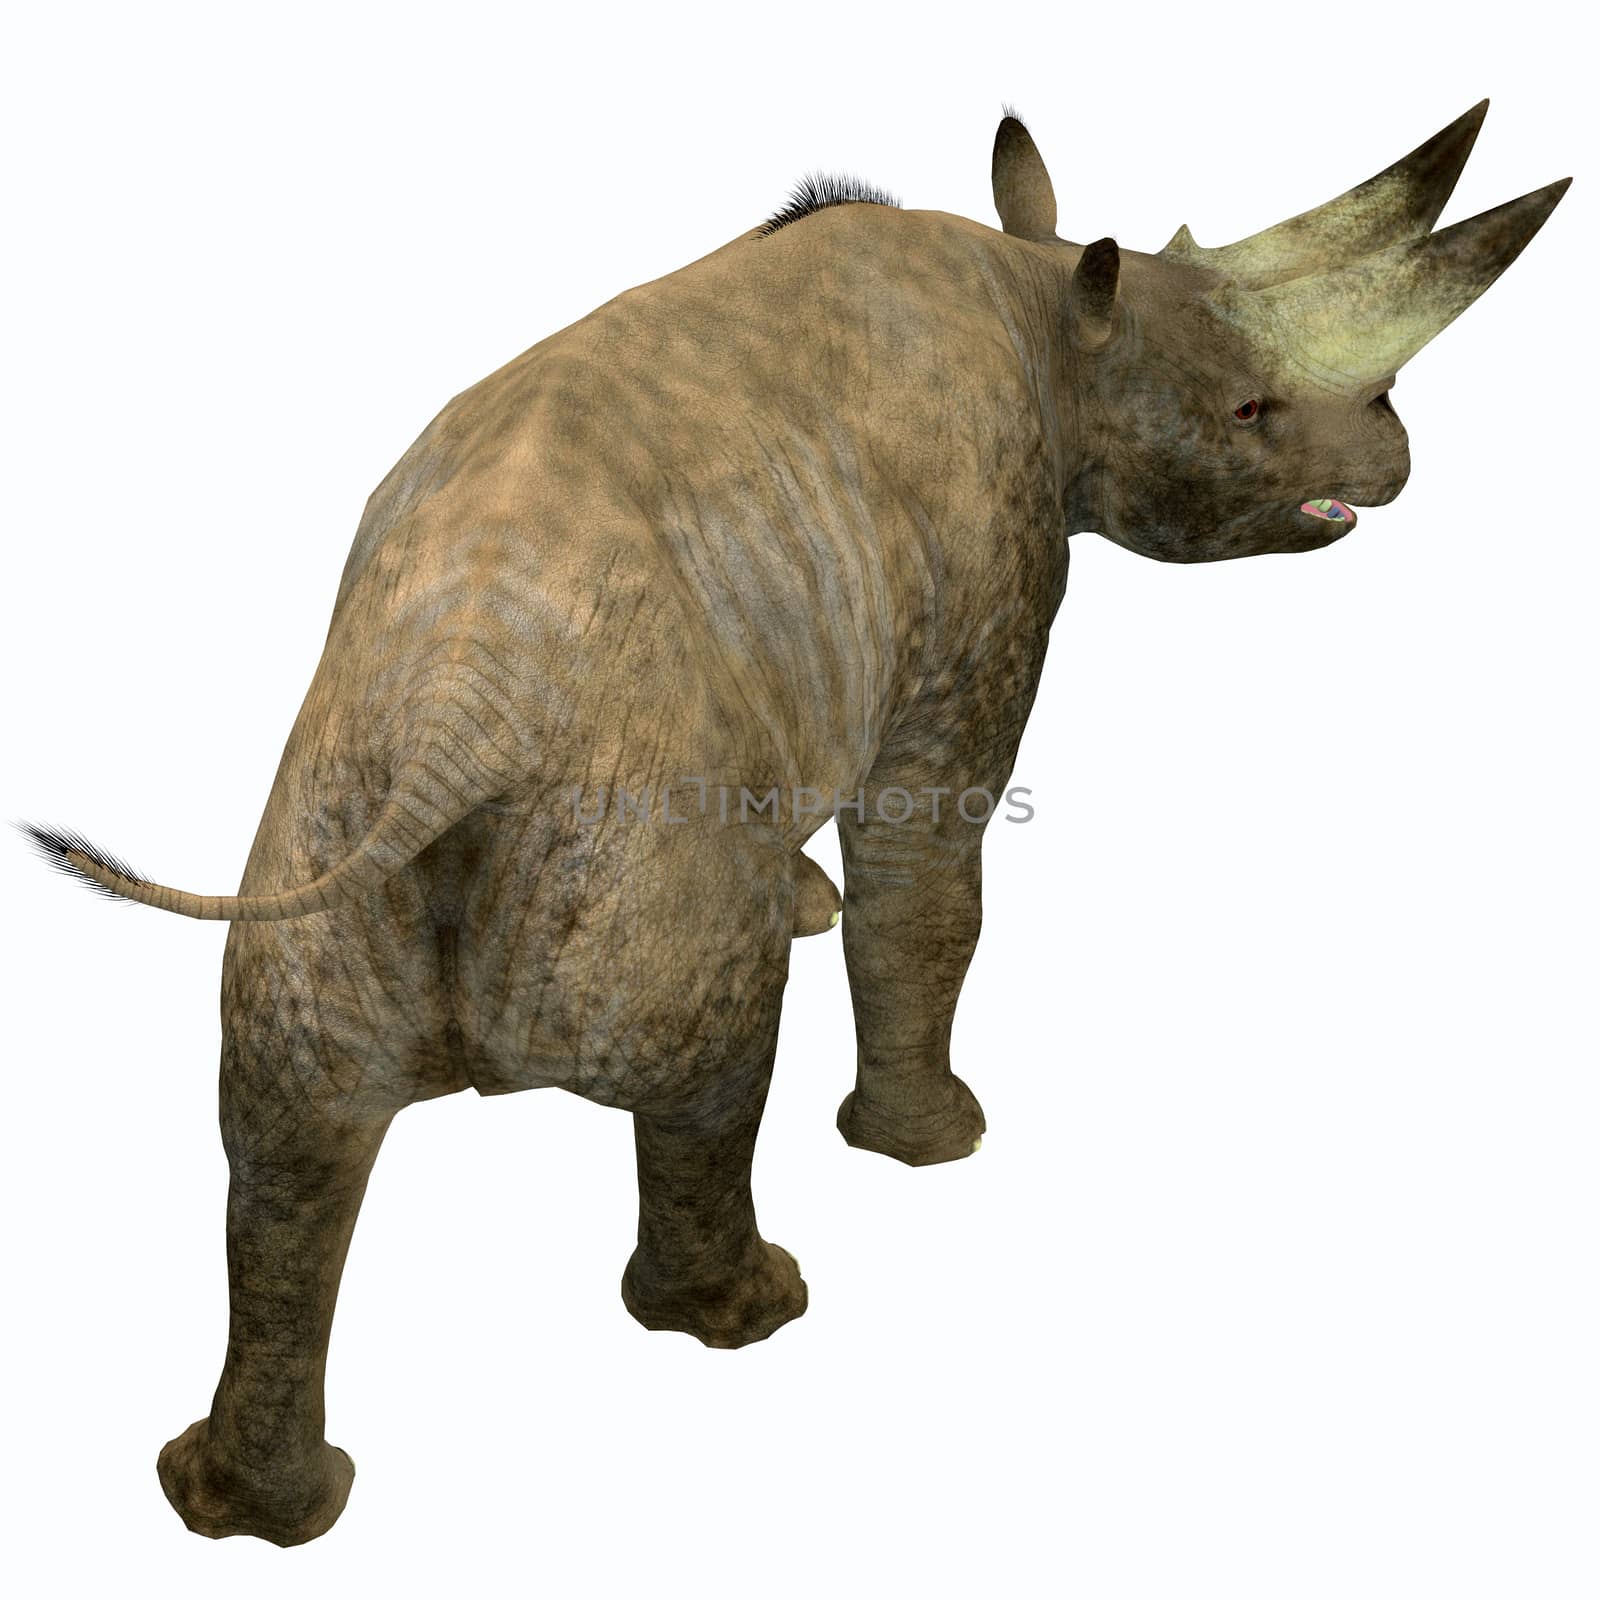 Arsinoitherium was a herbivorous rhinoceros-like mammal that lived in Africa in the Early Oligocene Period.